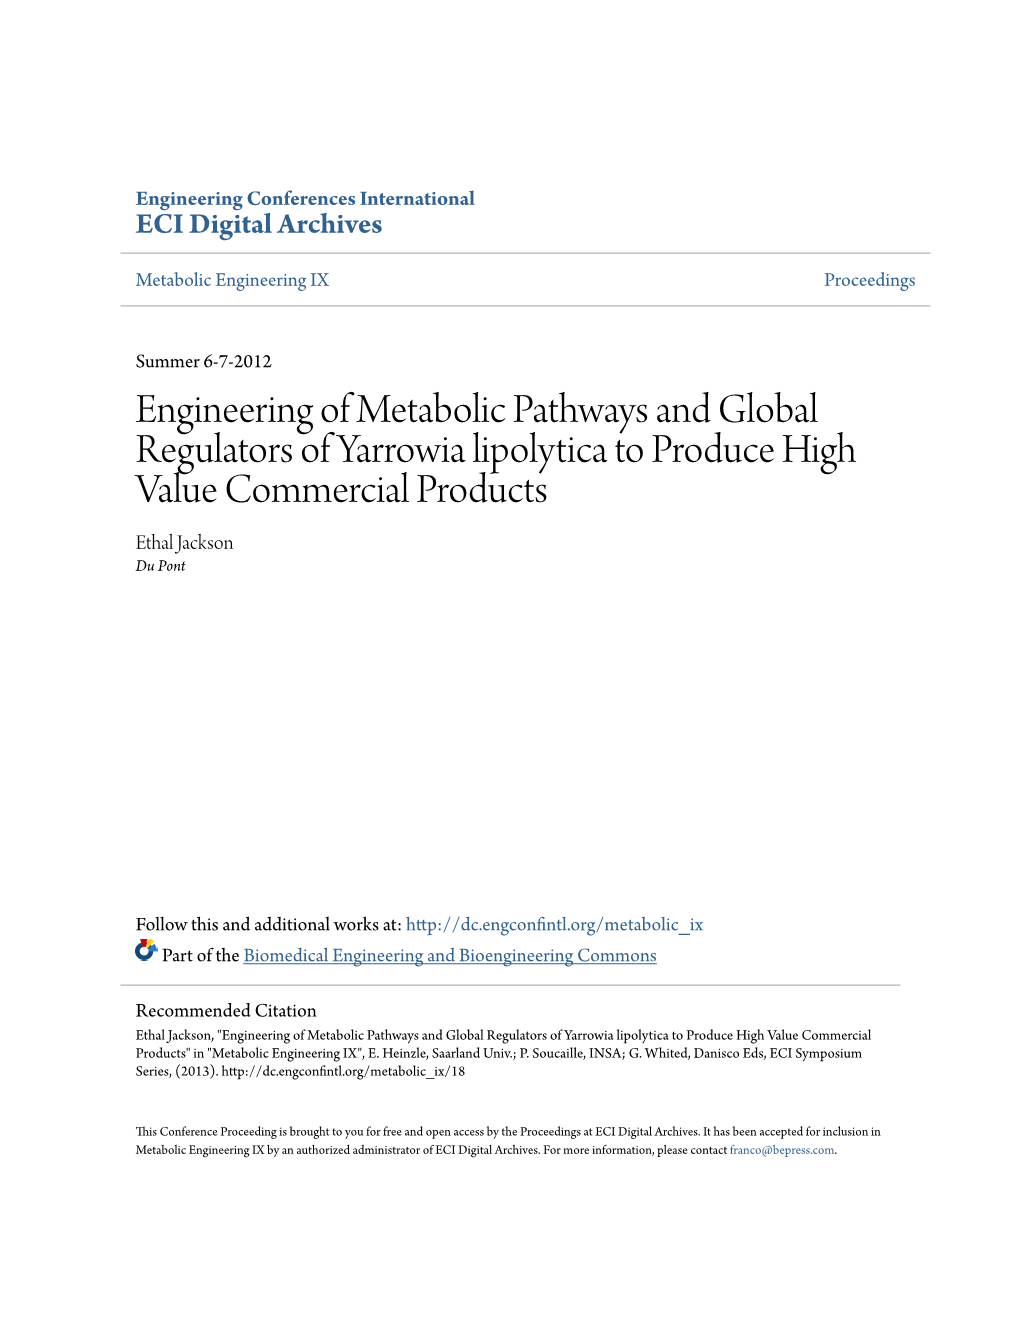 Engineering of Metabolic Pathways and Global Regulators of Yarrowia Lipolytica to Produce High Value Commercial Products Ethal Jackson Du Pont